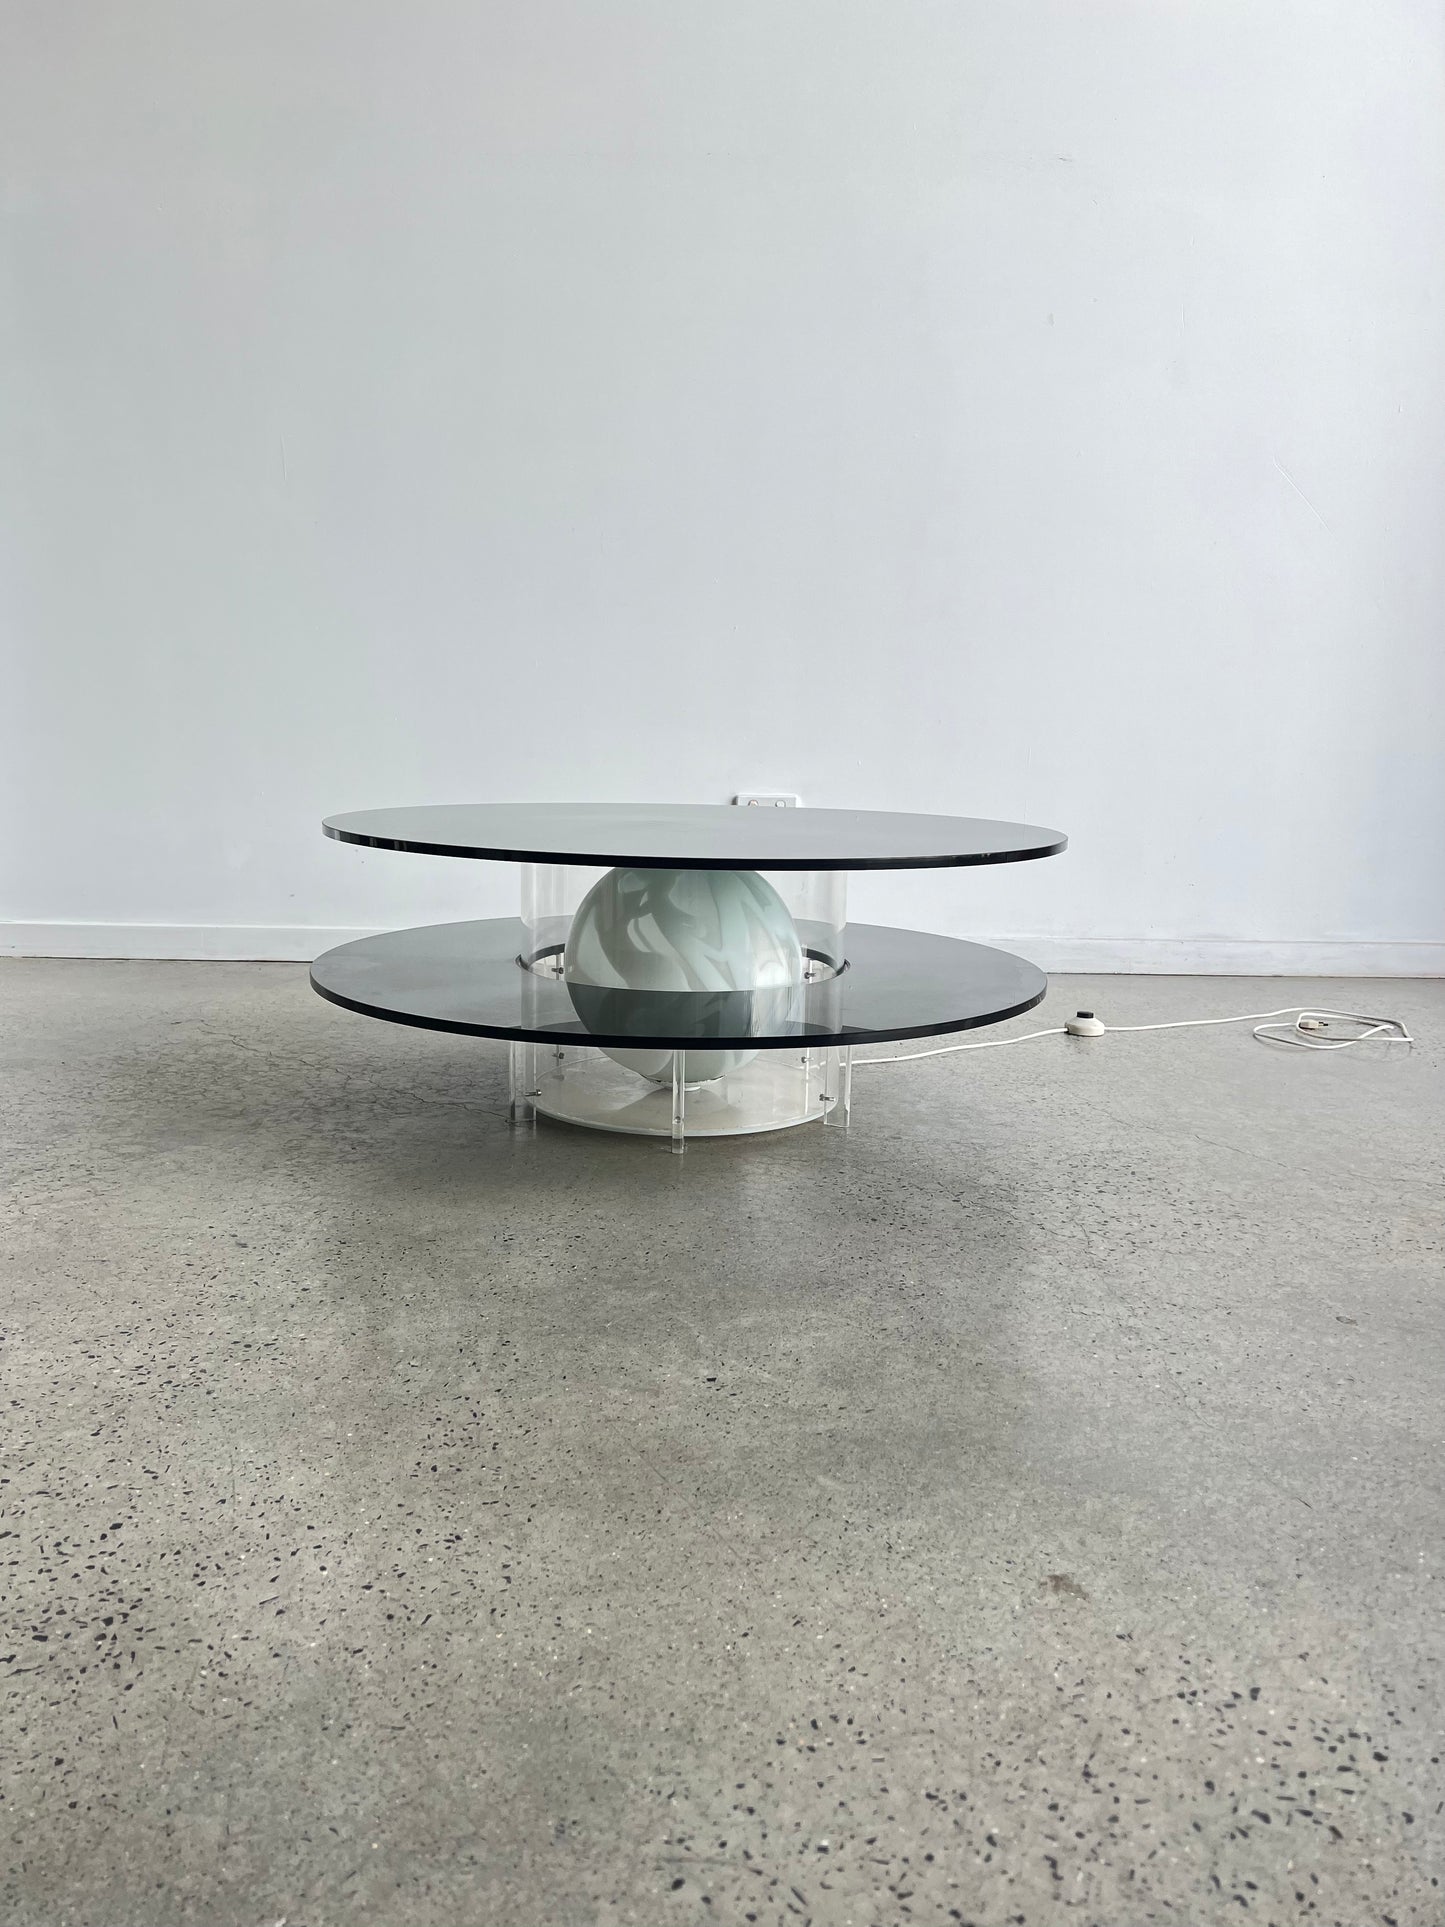 Space Age Round Coffee Table with Smoked Glass, Plexiglass base & inside Murano Glass Ball, 1970s